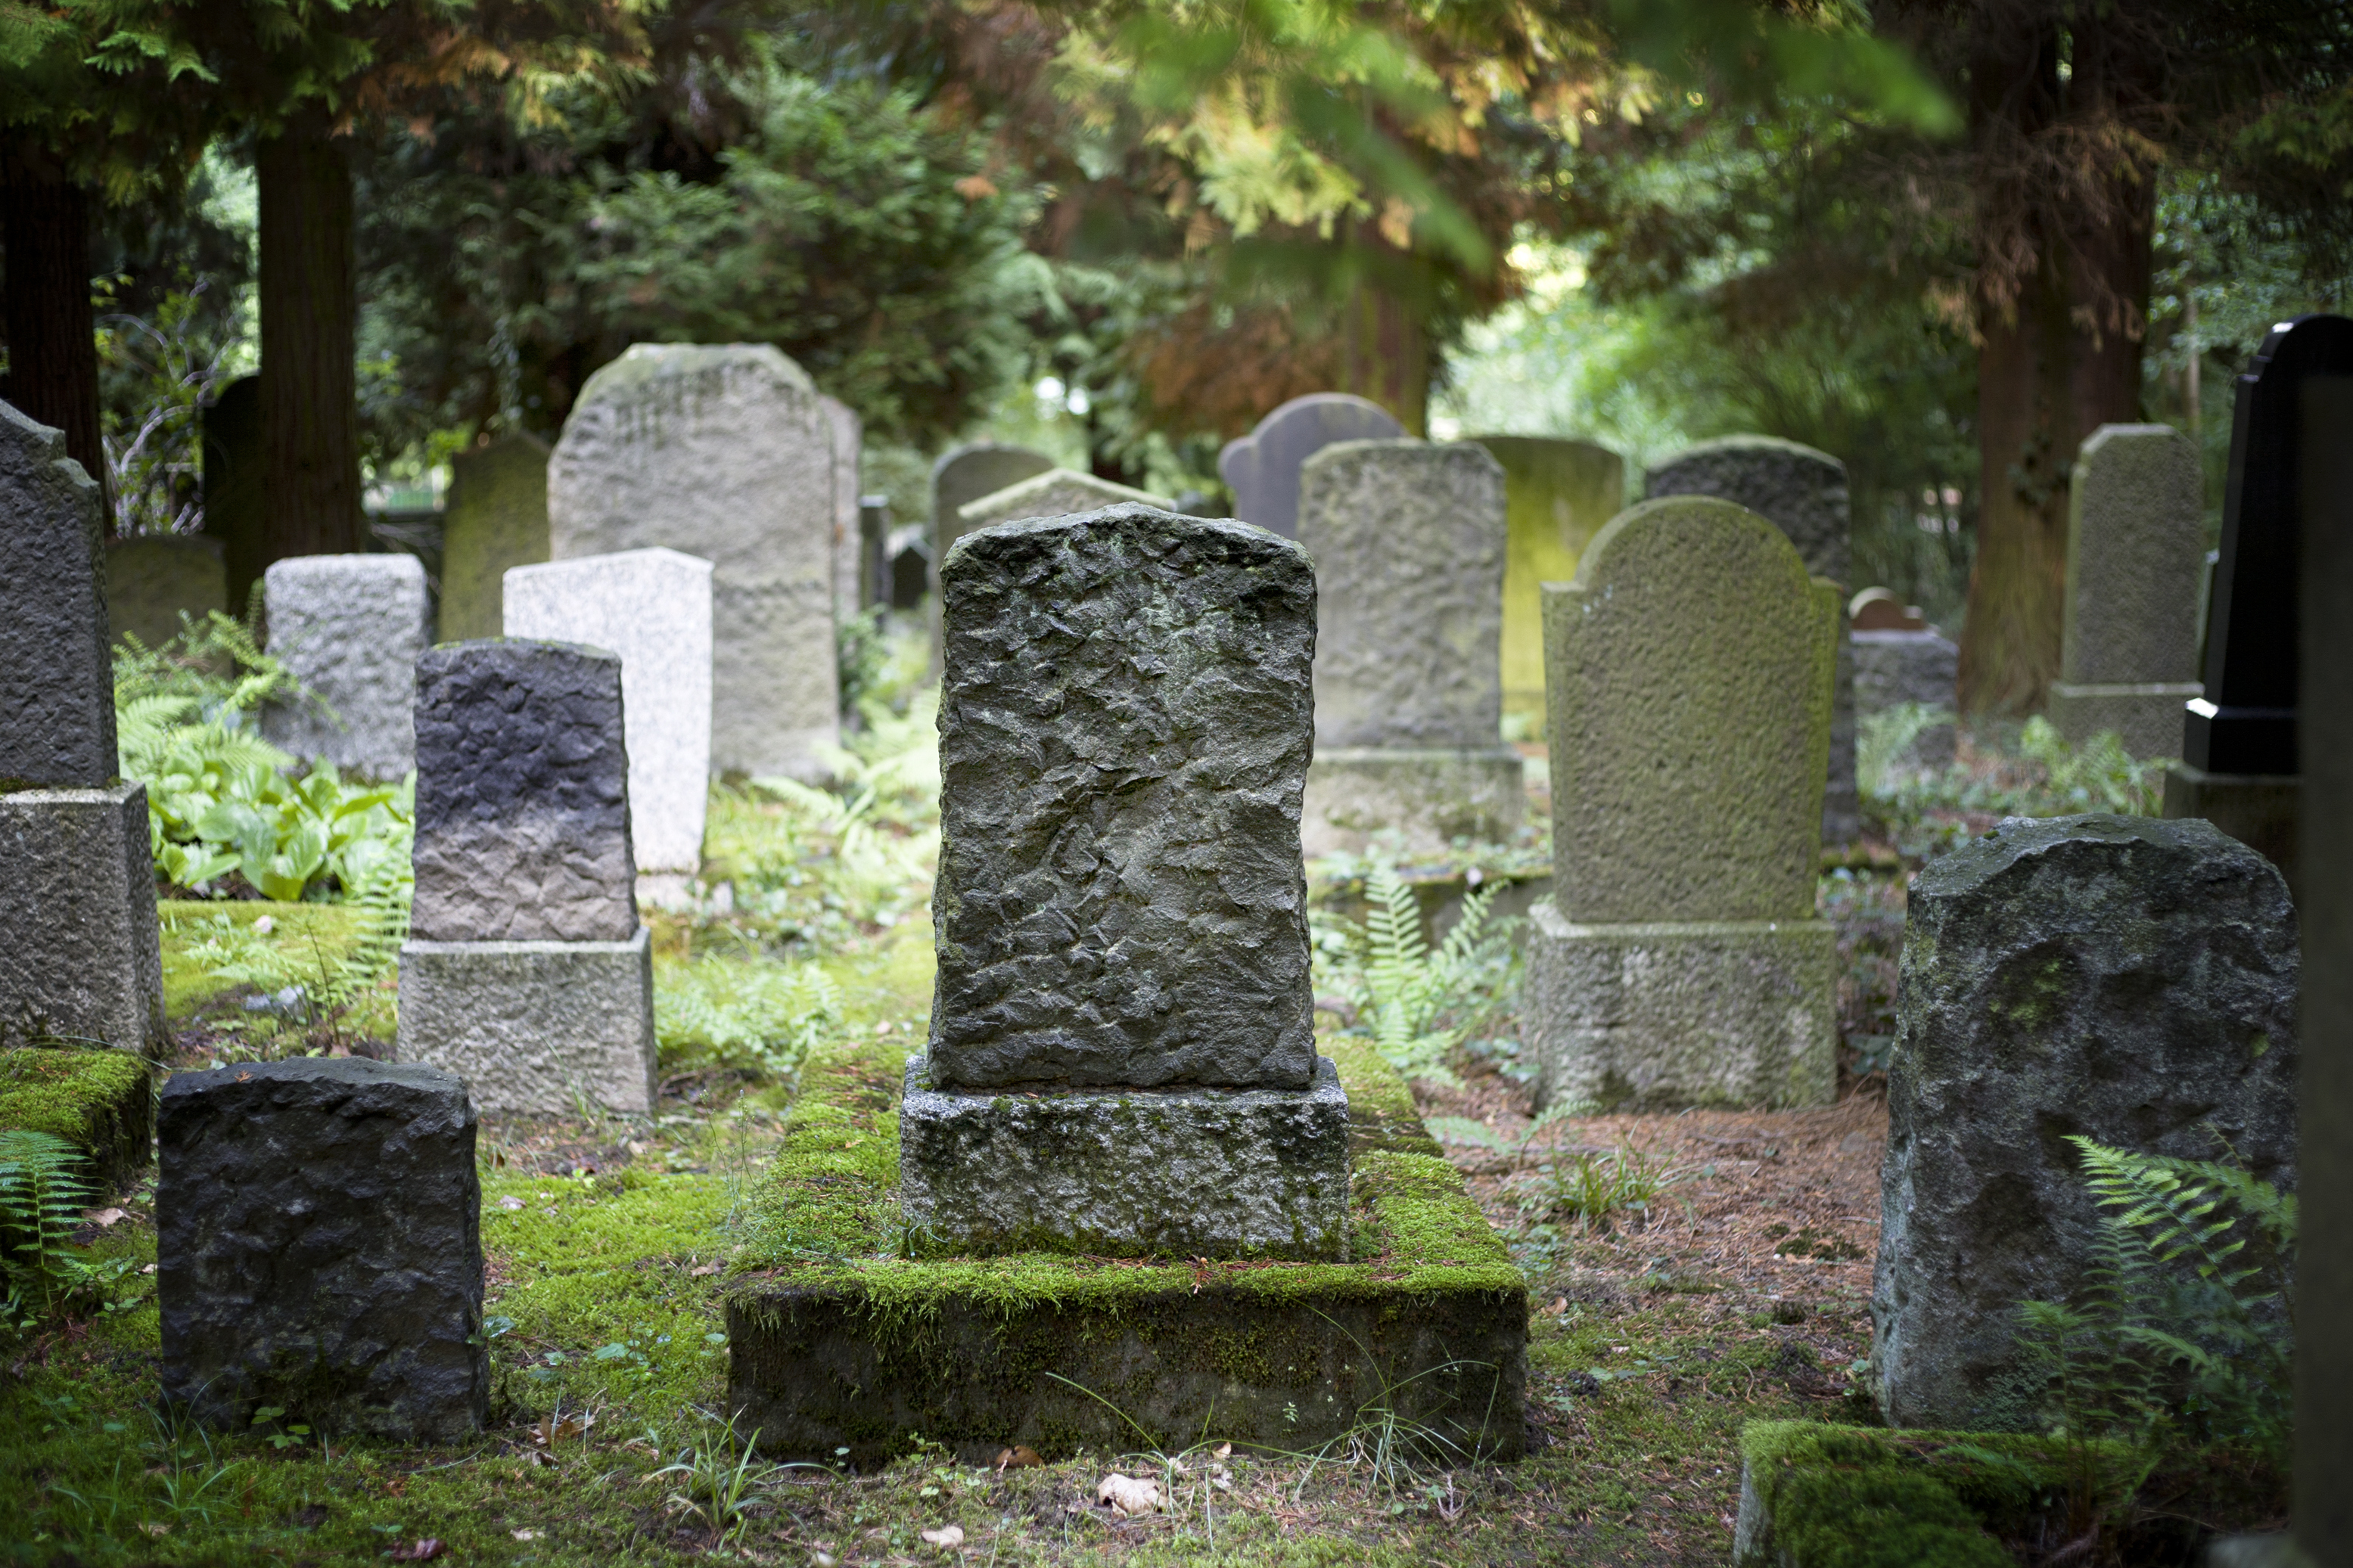 A serene cemetery scene featuring various aged tombstones of different shapes and sizes with moss and greenery surrounding them. No people are present